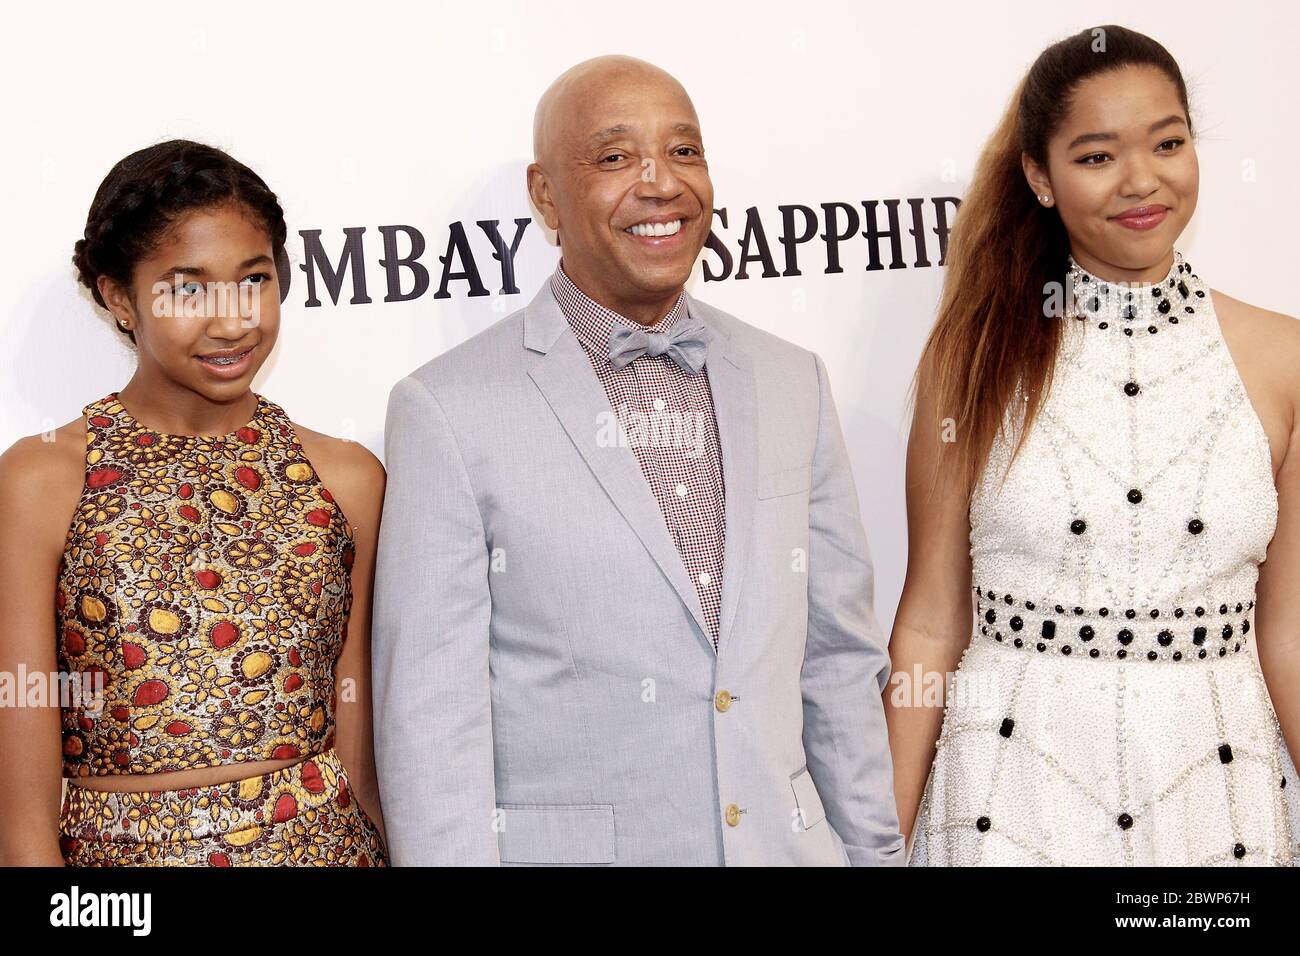 Southampton, NY, USA. 18 July, 2015. Ming Lee, Russell Simmons, Aoki Lee at the Rush Philanthropic ArtsFoundation's 20th Anniversary 'Art For Life' Benefit at Fairview Farms. Credit: Steve Mack/Alamy Stock Photo